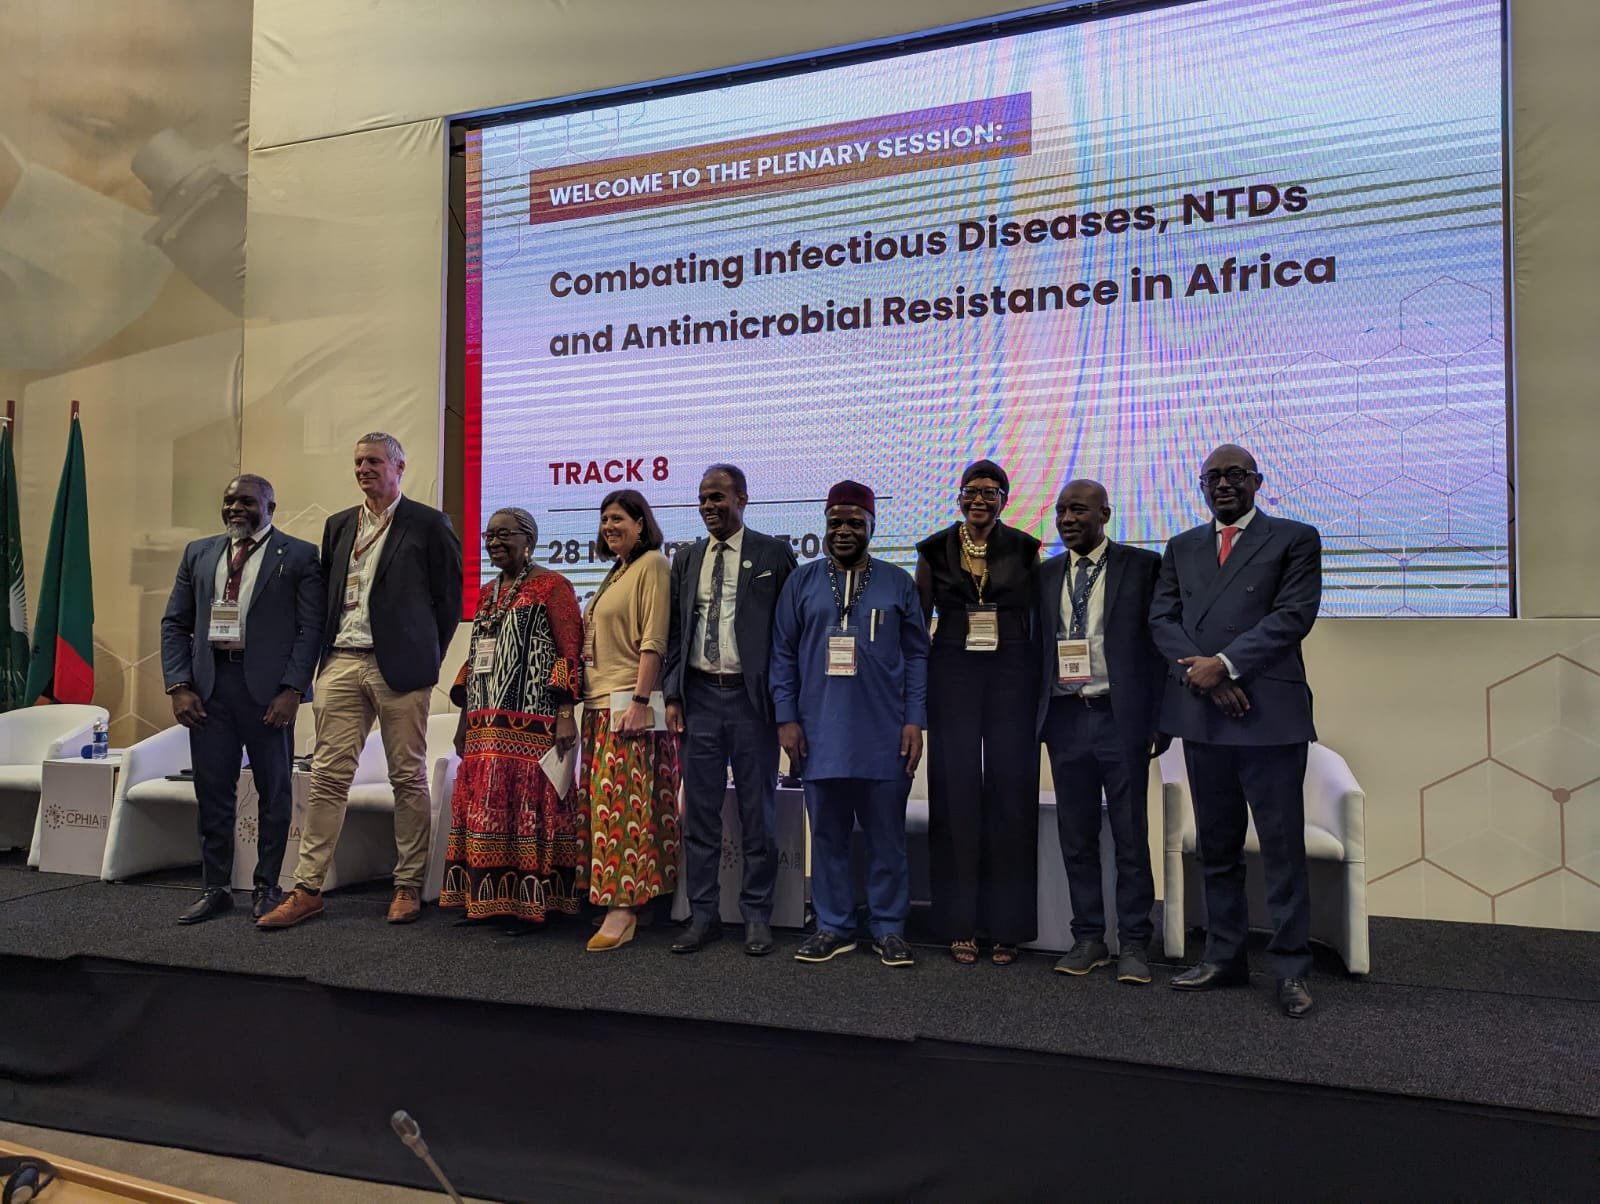 Panellists at Combating Infectious Diseases, NTDs and Antimicrobial Resistance (AMR) in Africa